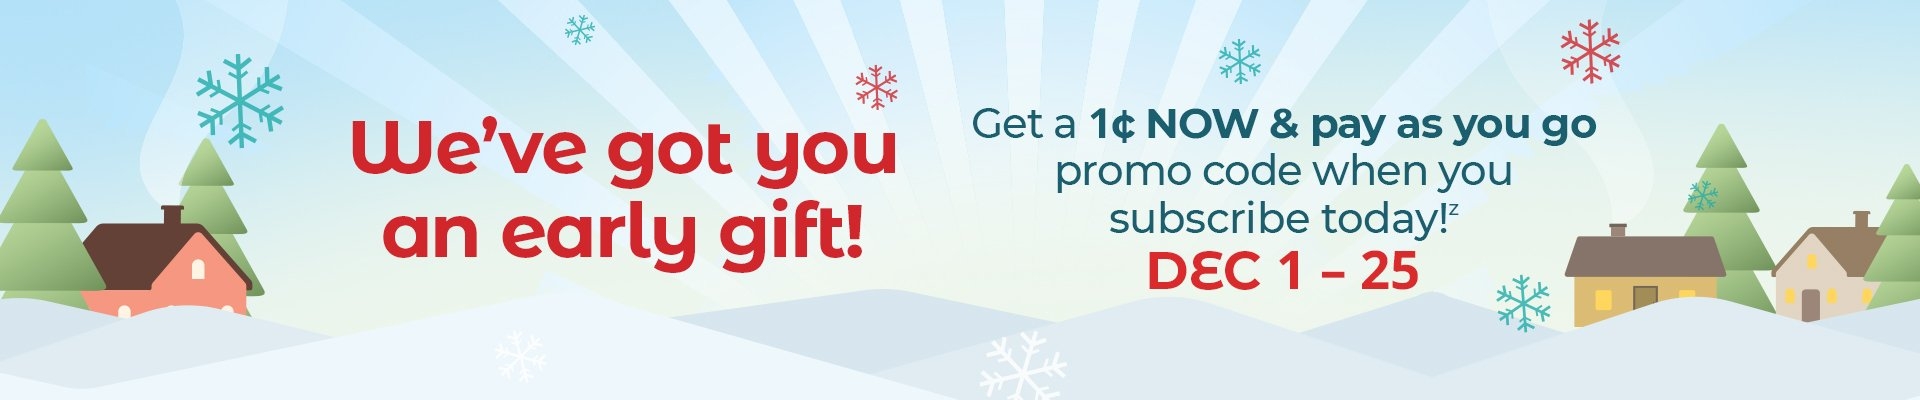 We've got you an early gift! Get a $0.01 now and pay as you go promo code when you subscribe today